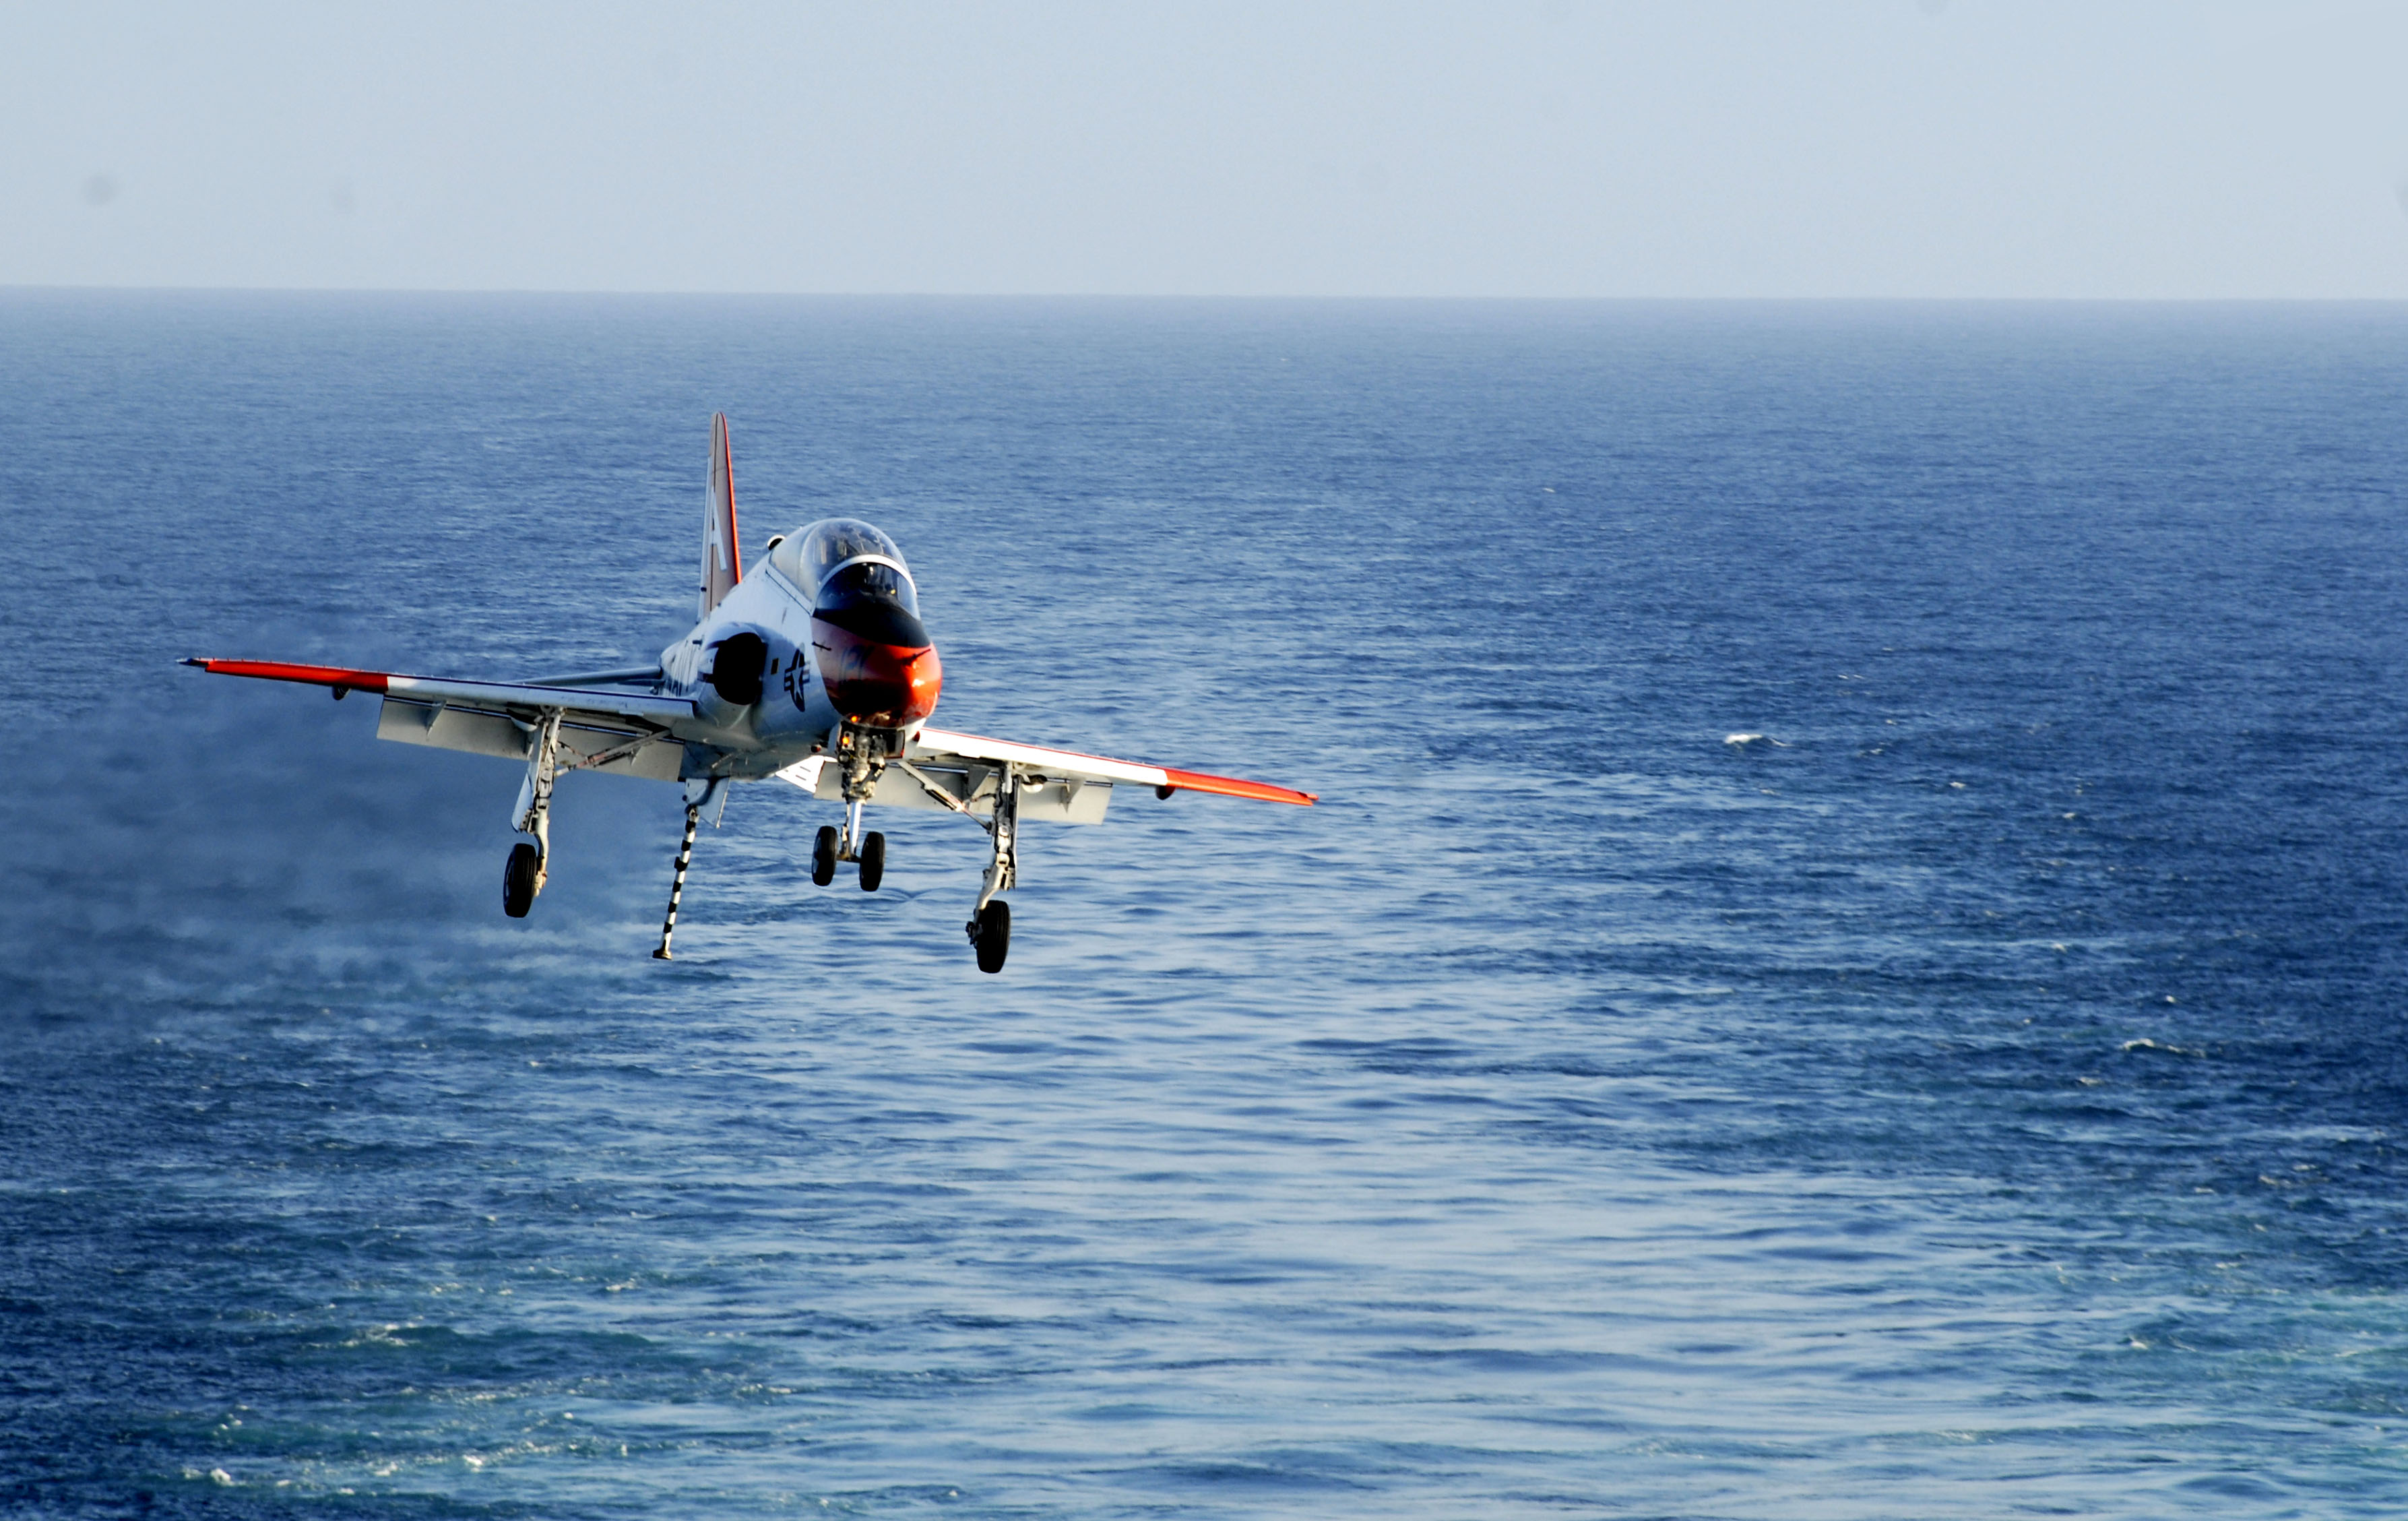 US Navy 100203-N-2475A-391 A T-45C Goshawk training aircraft assigned to Training Air Wing (TRAWING) 1 prepares to land aboard the Nimitz-class aircraft carrier USS John C. Stennis (CVN 74)